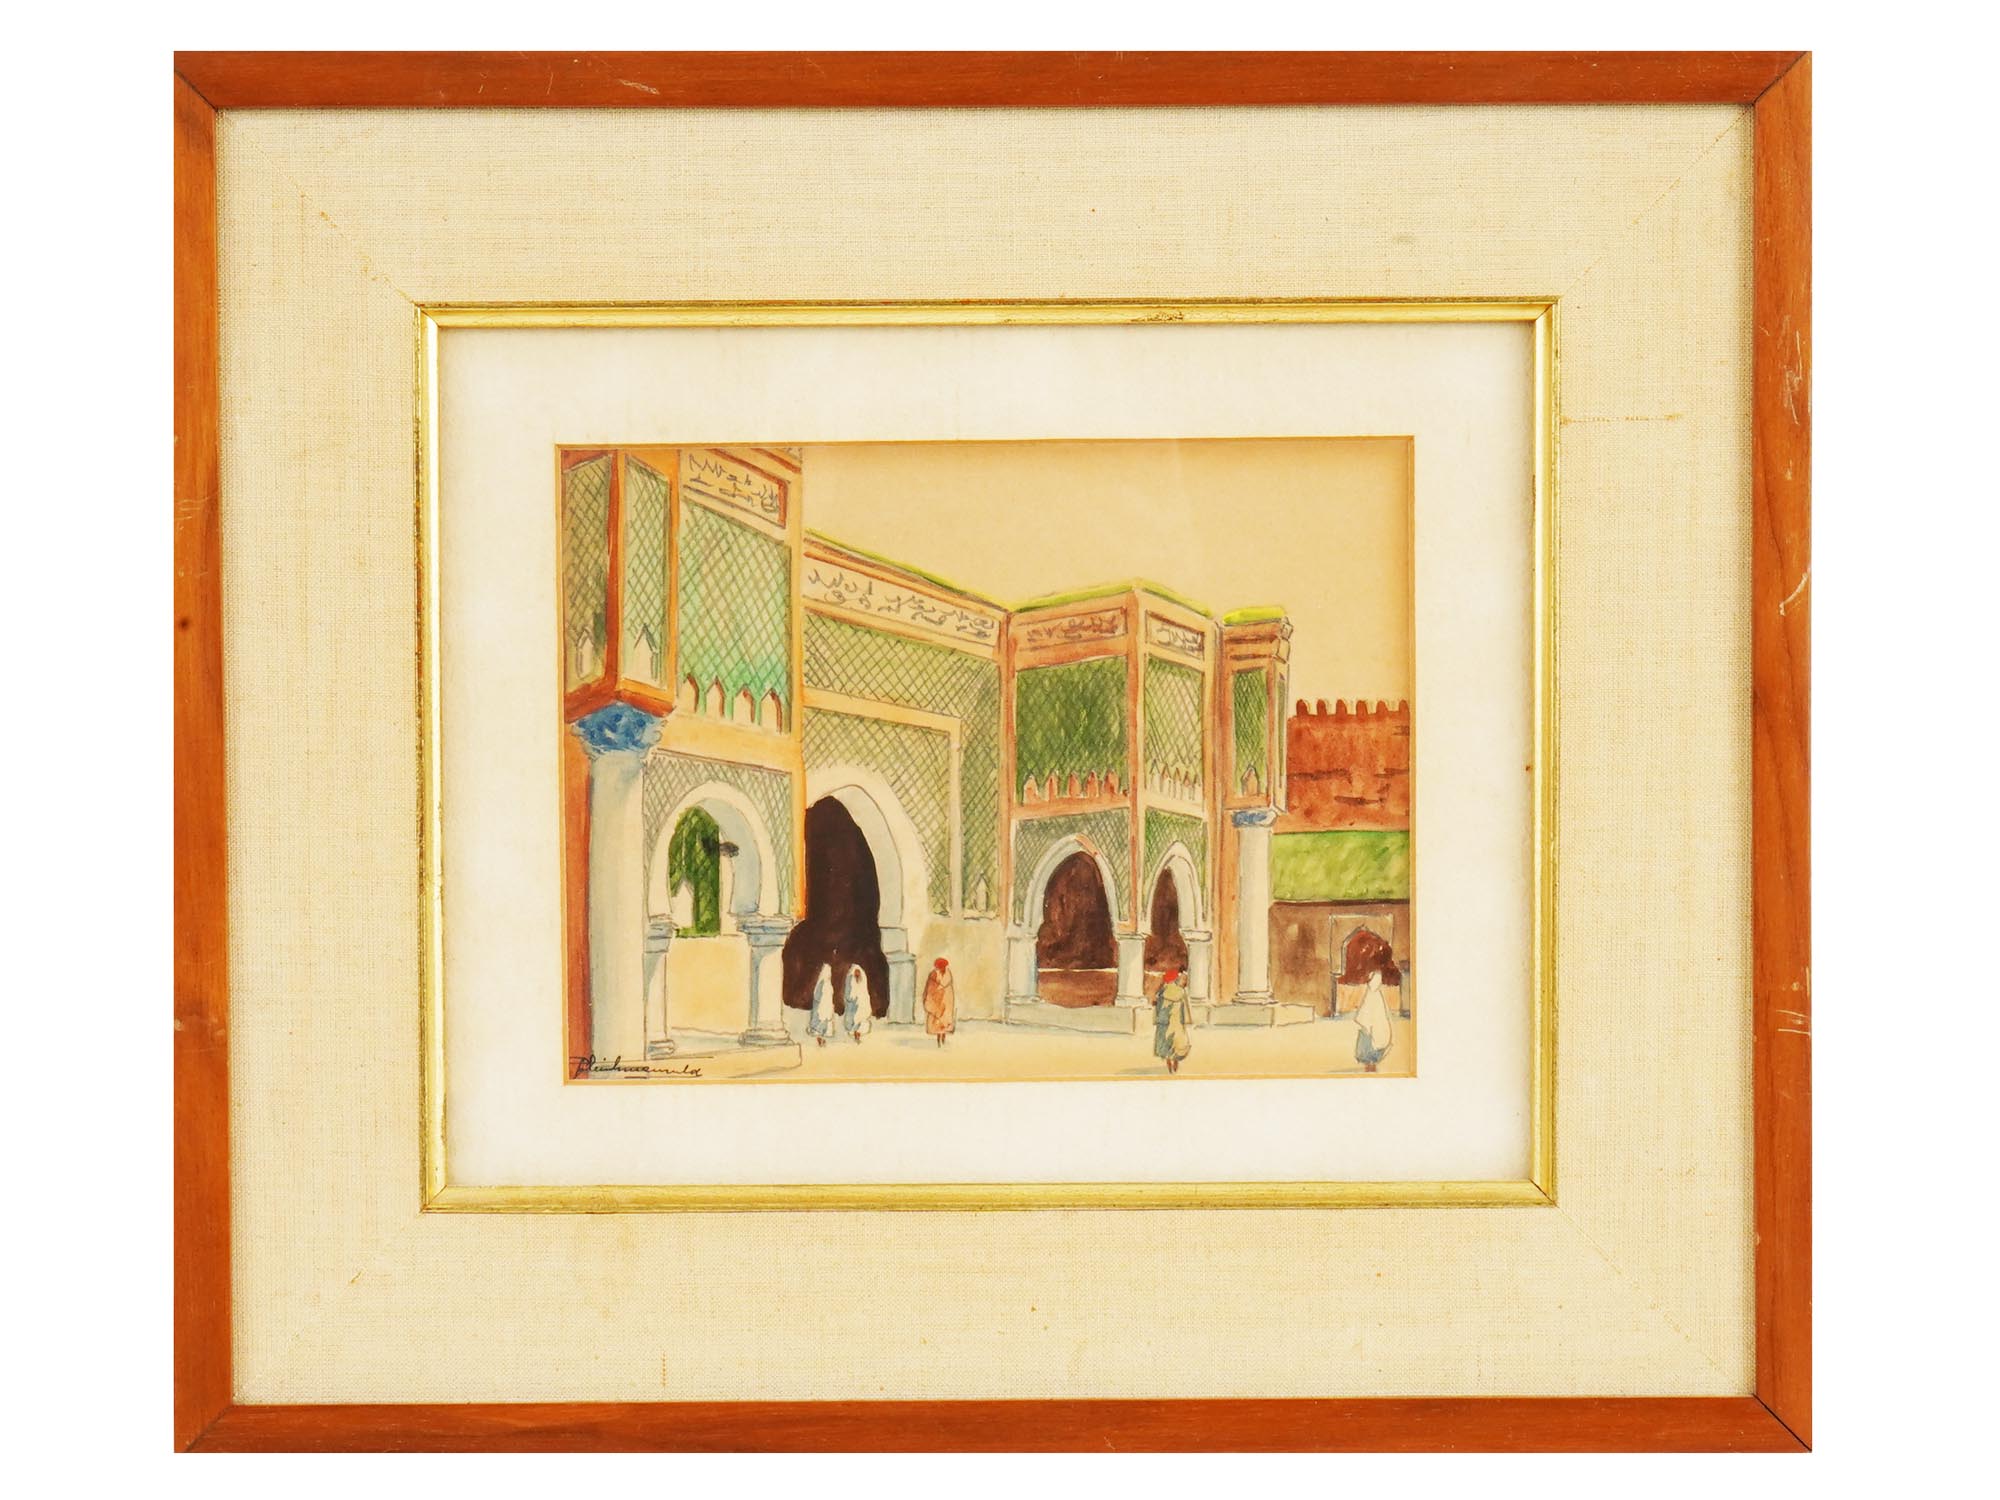 ANTIQUE MOROCCO WATERCOLOR PAINTINGS BY FLEISCHMANN PIC-2